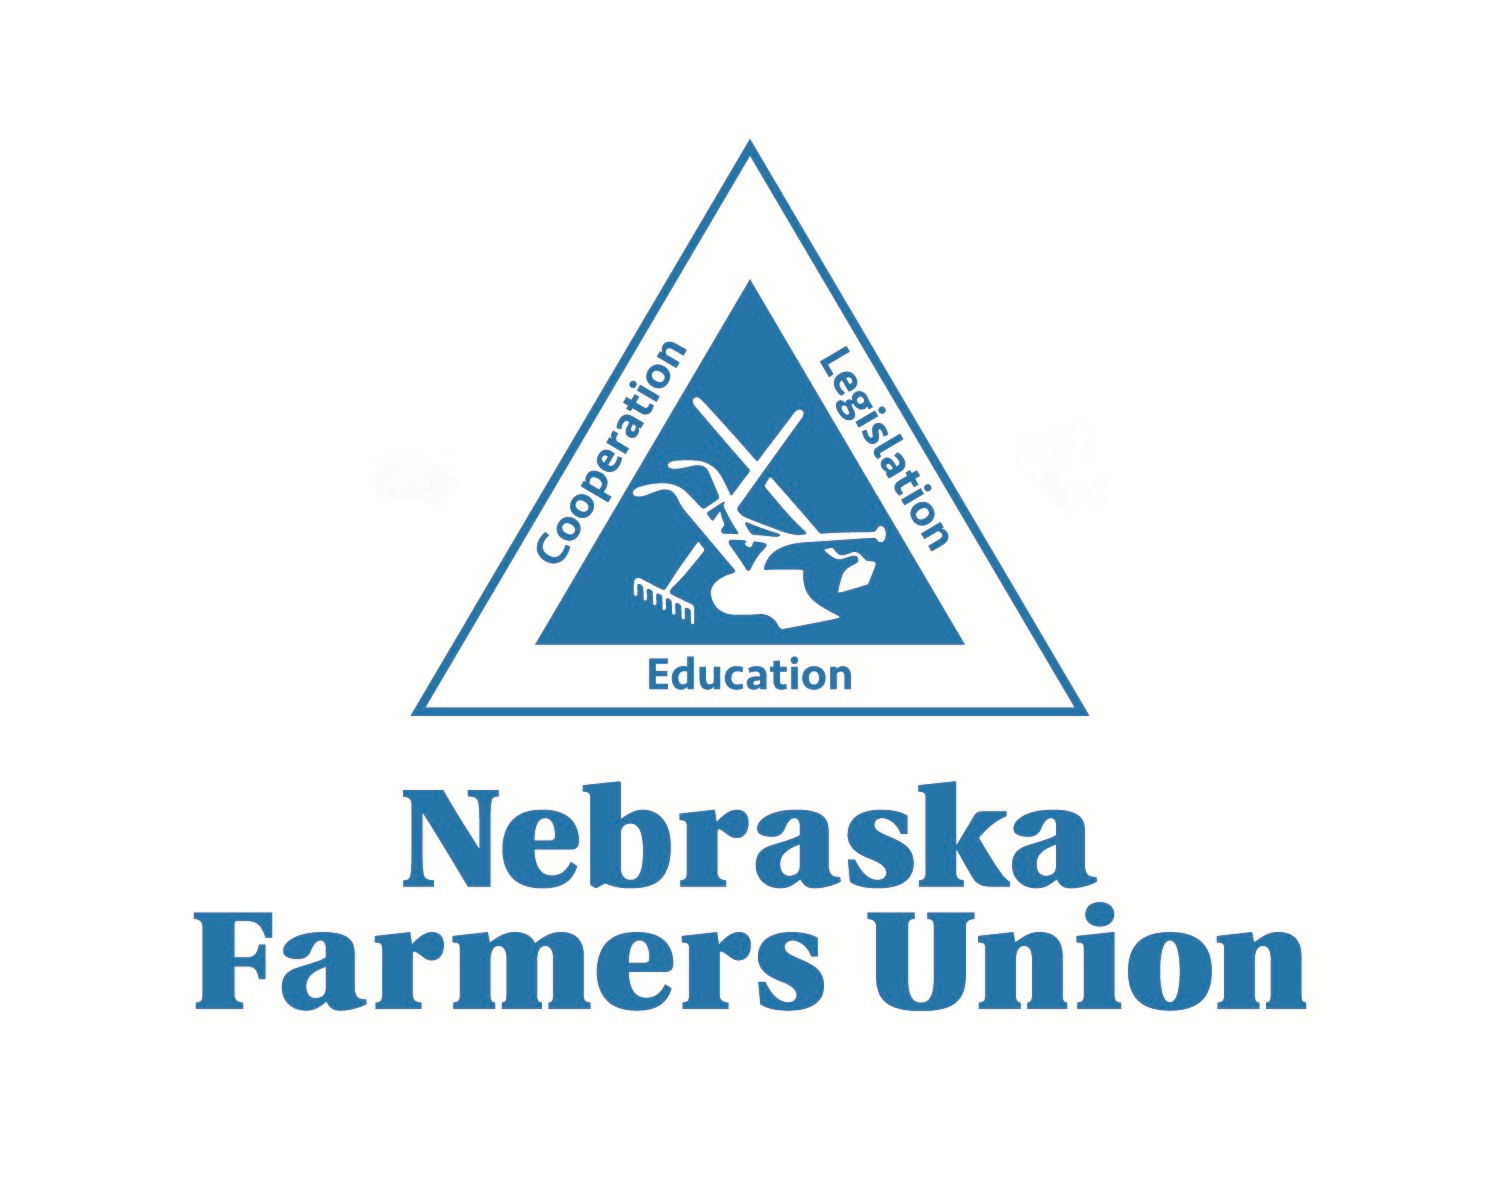 Nebraska Farmers Union Supports the Federal Energy Regulatory Commission’s Decision on Net Metering